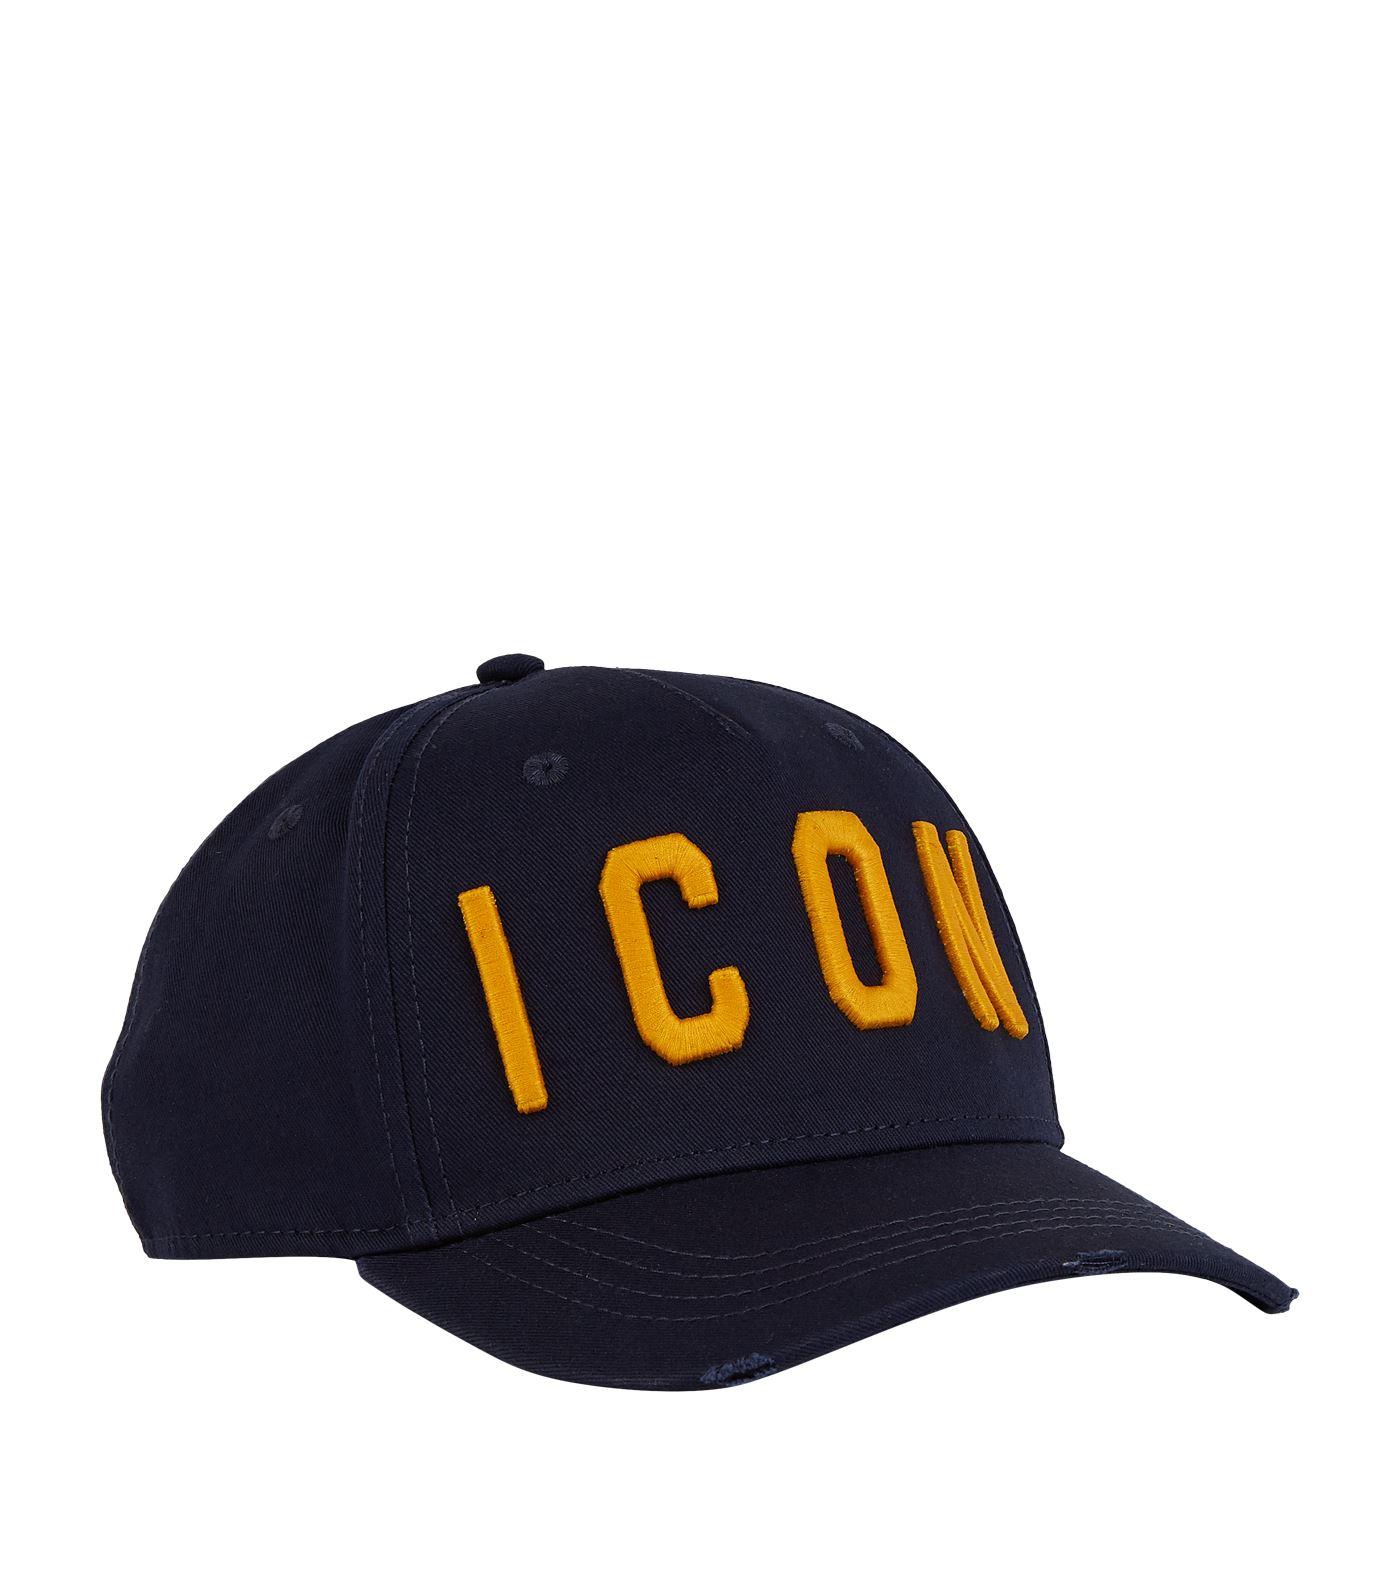 DSquared² Cotton Icon Logo Cap Navy in Blue for Men - Save 51% - Lyst